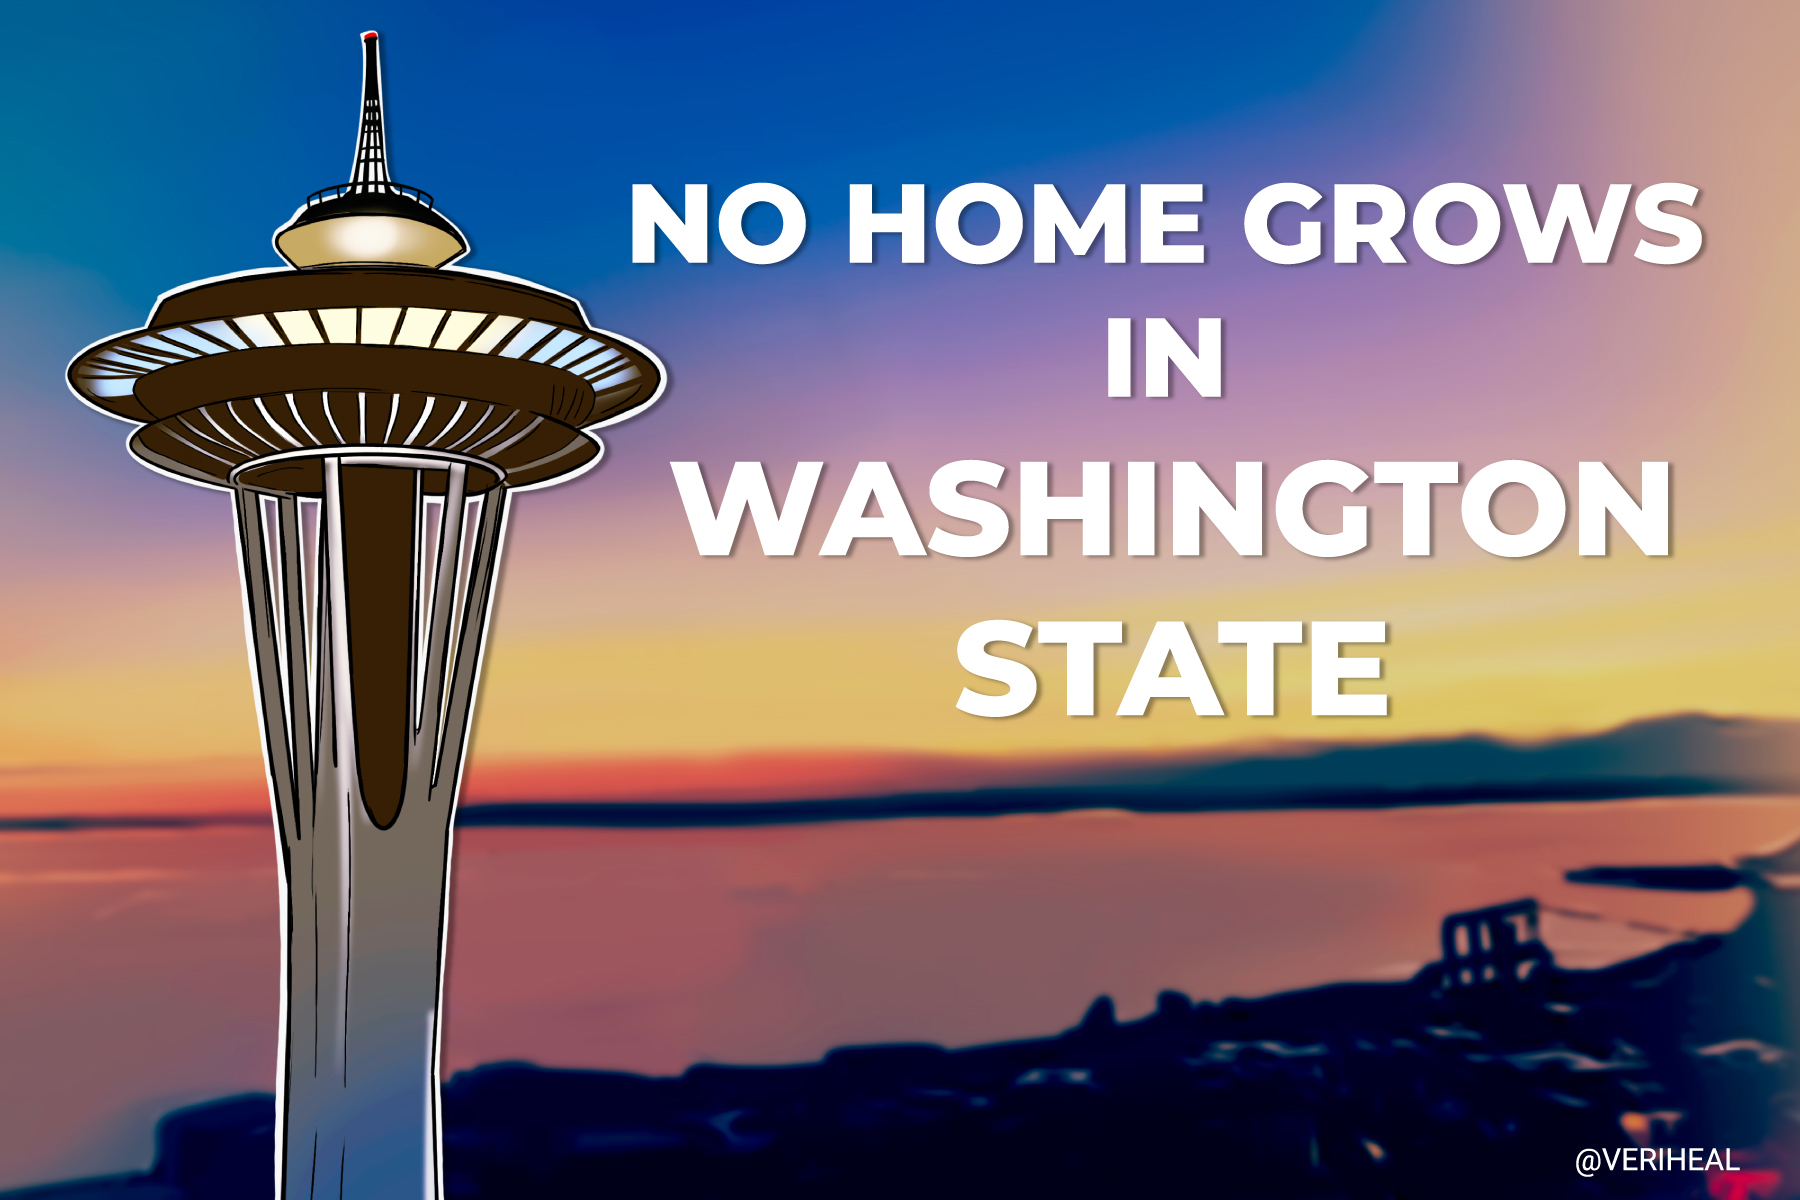 Laws Still Prohibit Cannabis Home Grows in Washington State